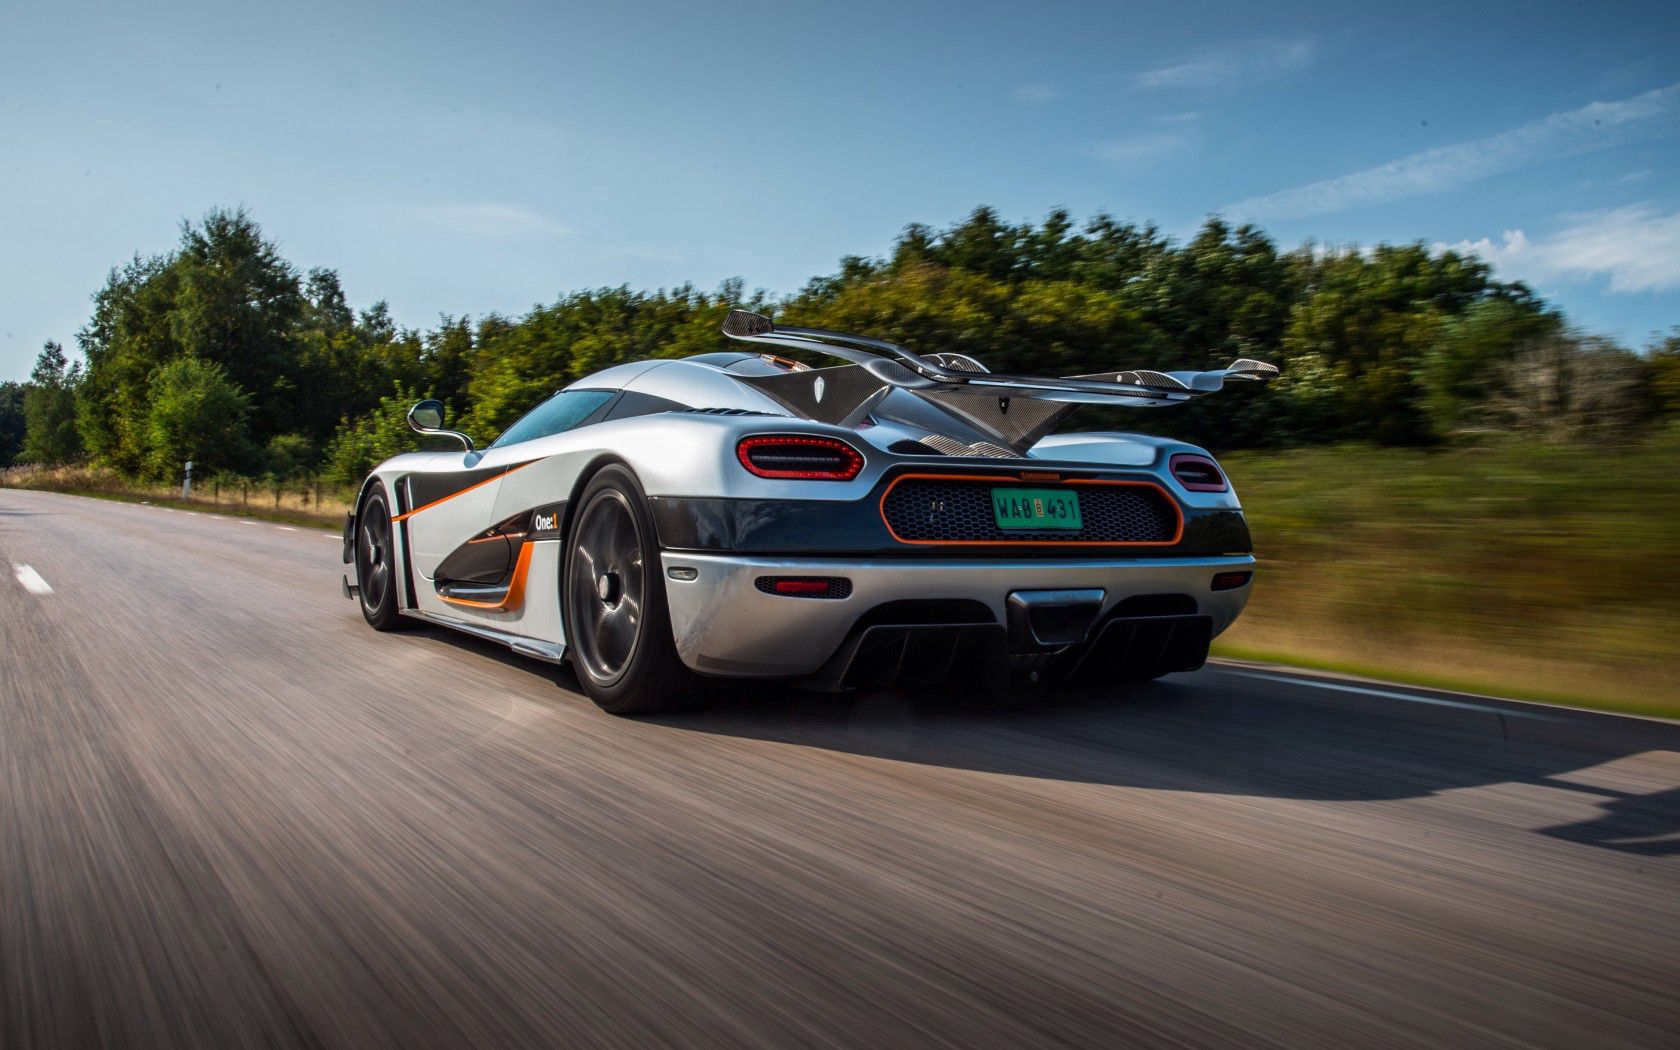 cars, sports, koenigsegg, sports car, back view, rear view, one 1 High Definition image